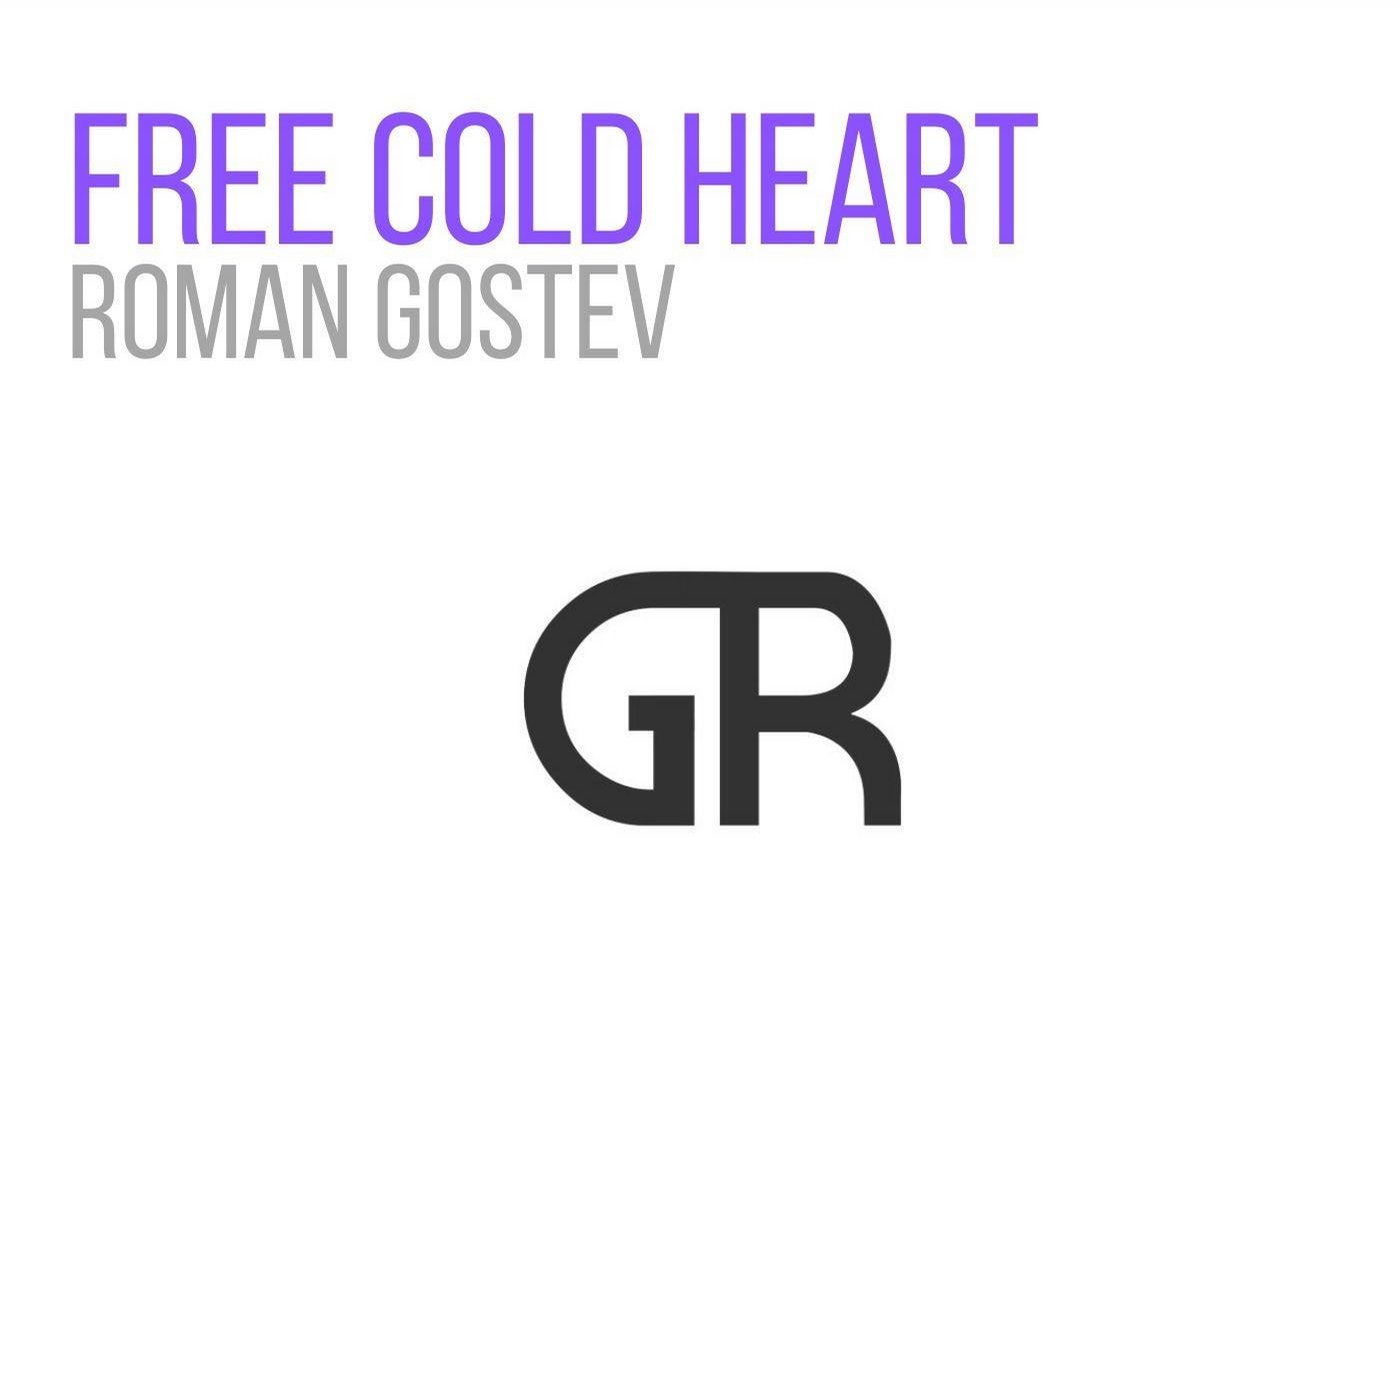 Free Cold Heart